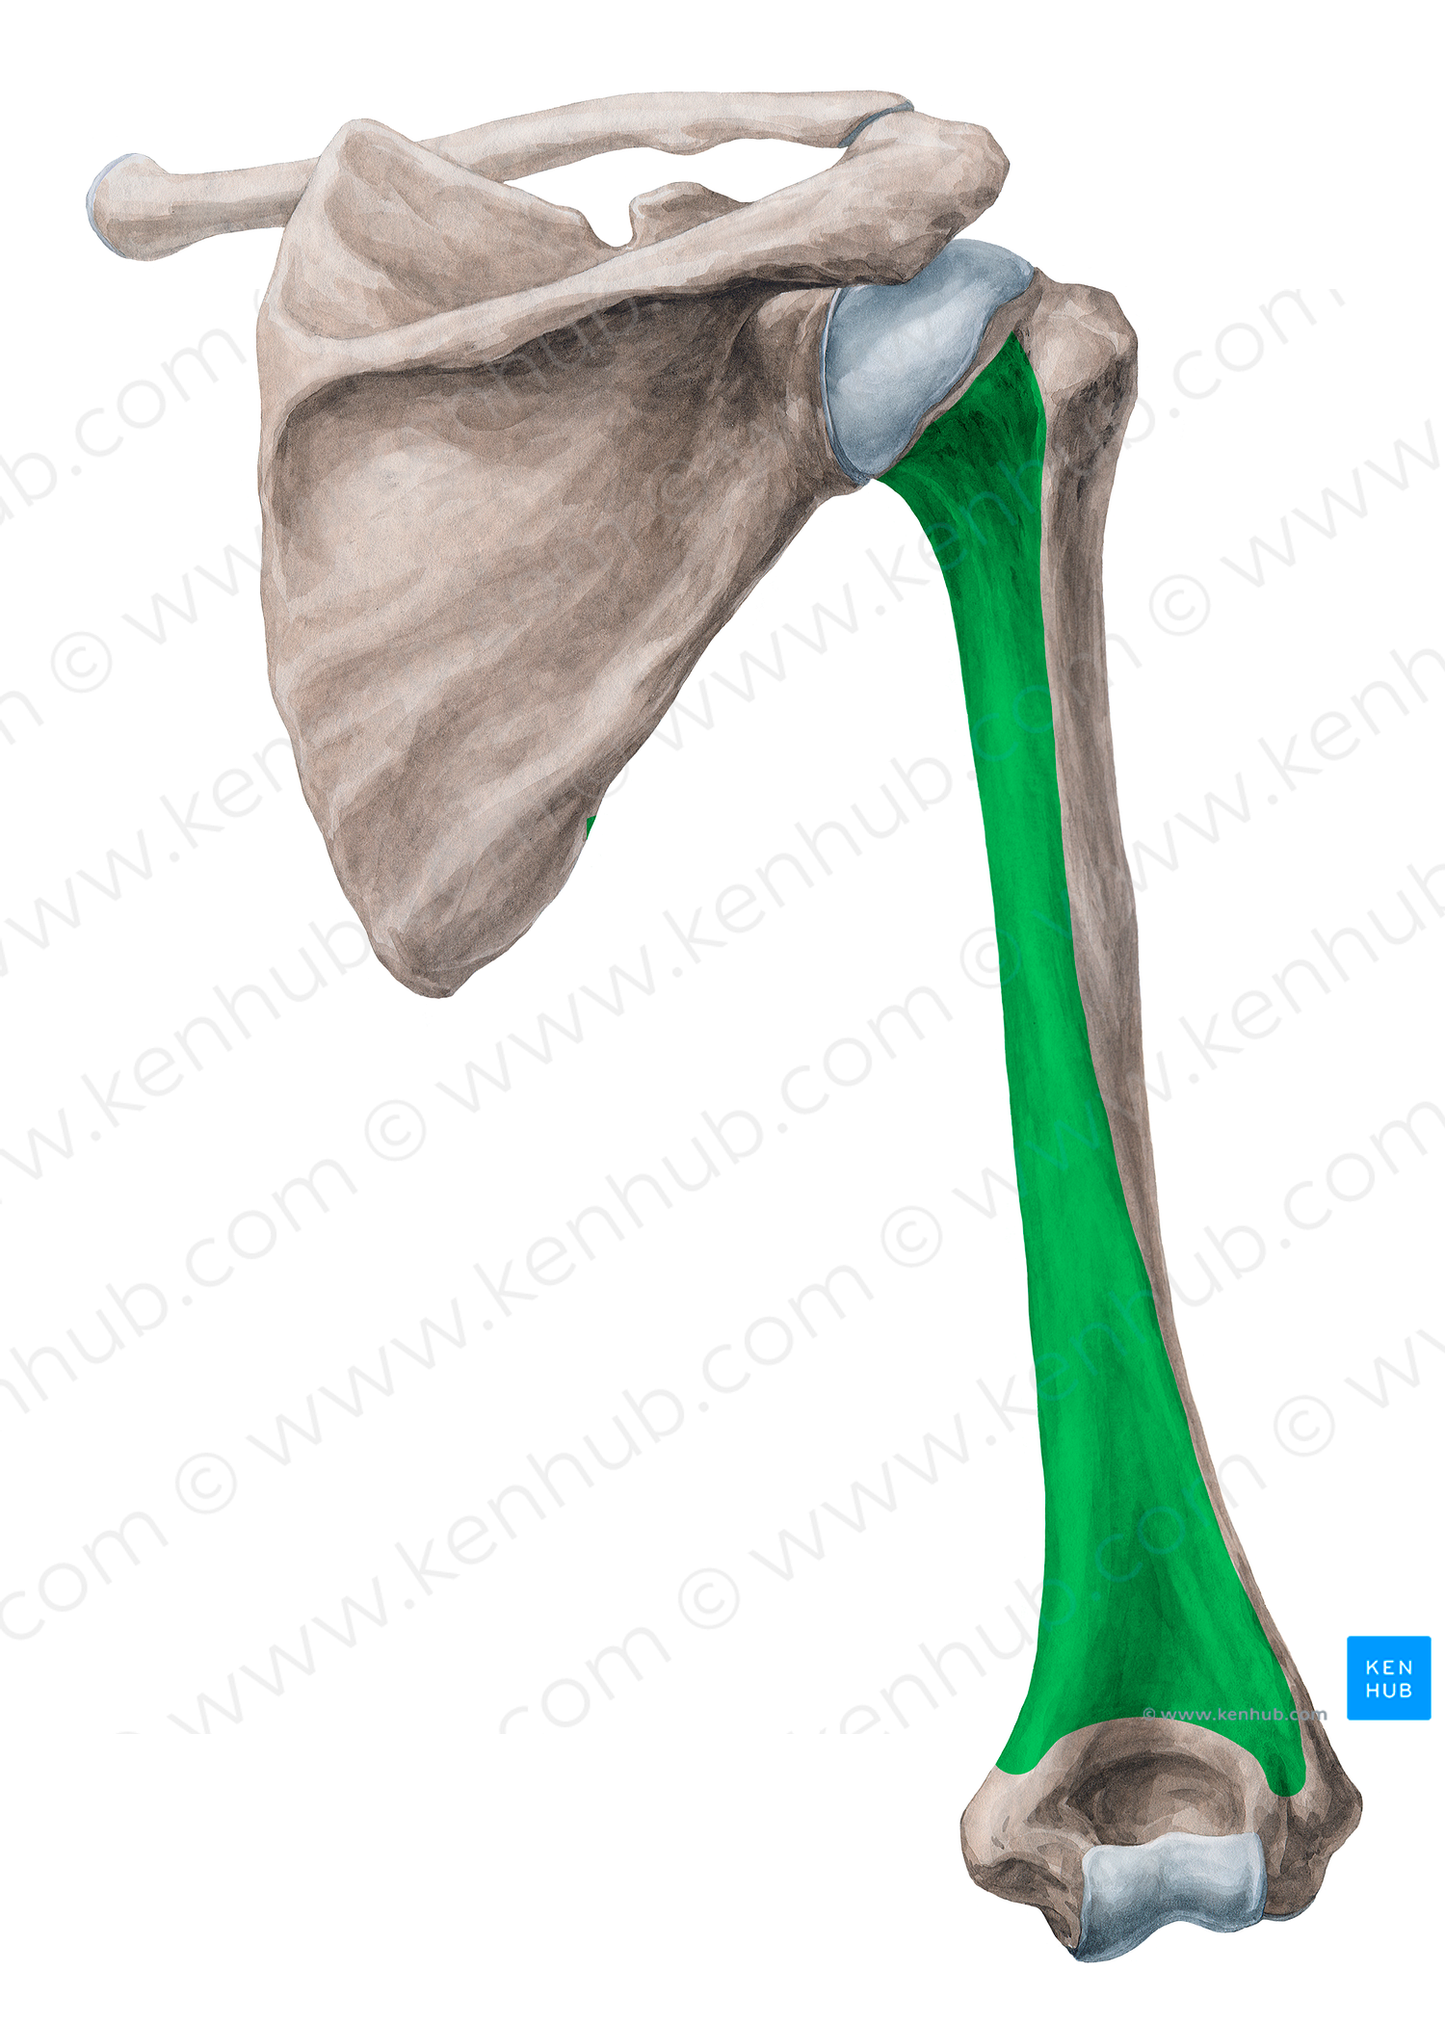 Posterior surface of humerus (#19939)